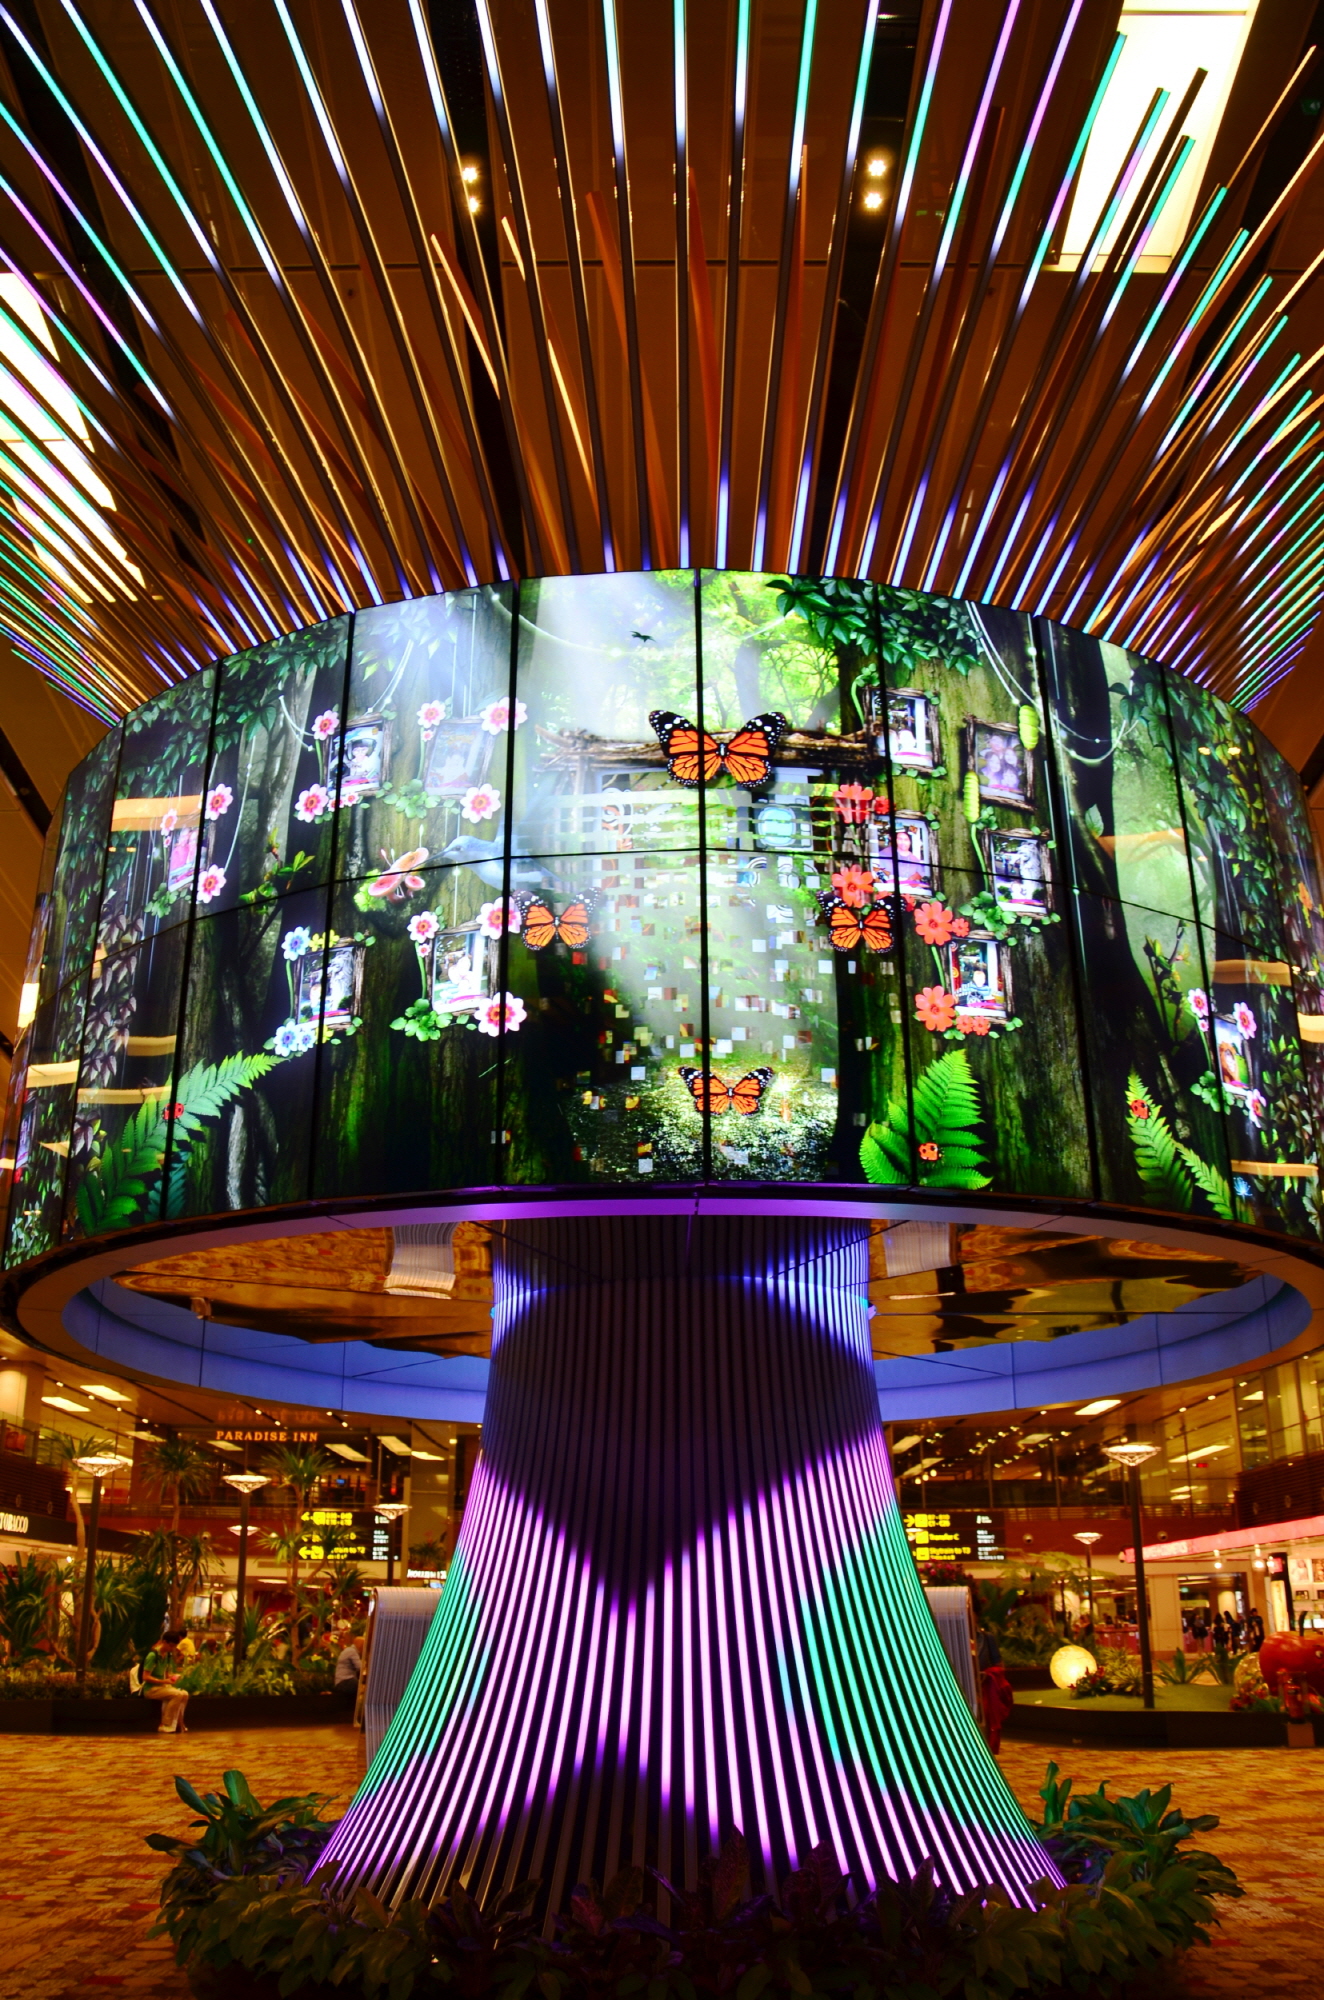 Numerous LG 47WV30 displays create a ‘Social Tree’ video wall that display vivid images in Changi Airport’s Terminal One